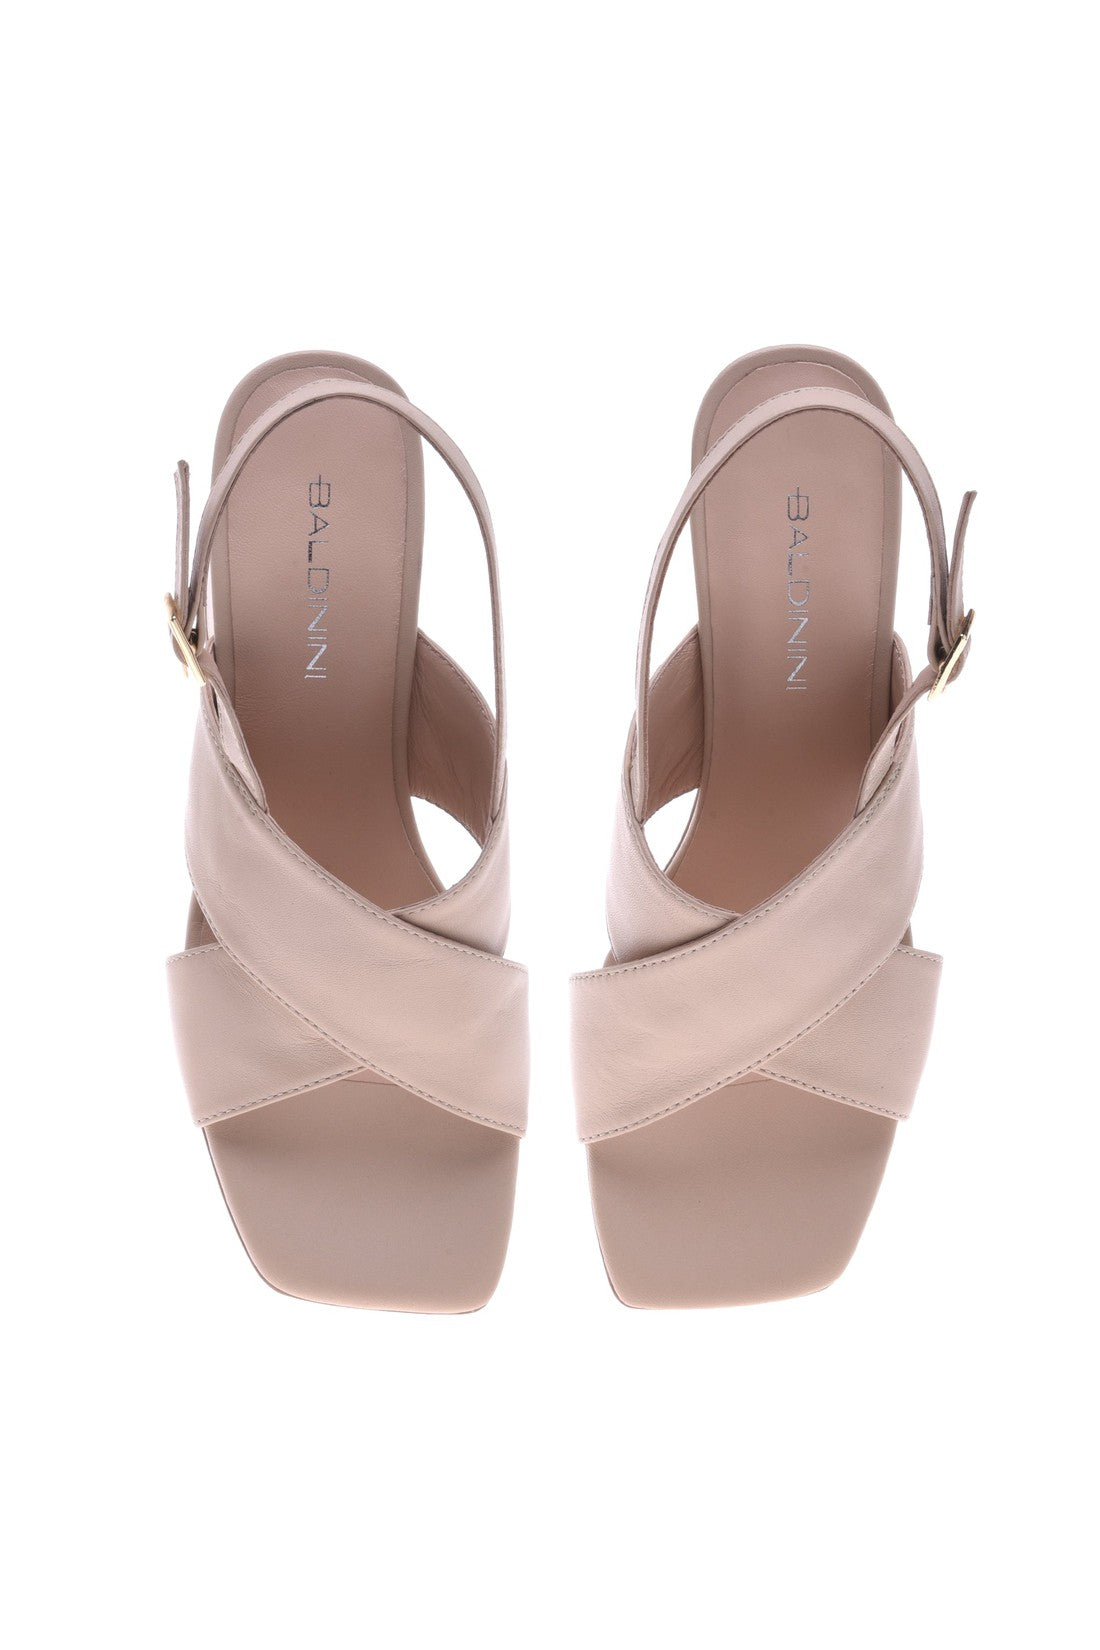 BALDININI-OUTLET-SALE-Sandal-in-beige-nappa-leather-Sandalen-ARCHIVE-COLLECTION-2.jpg